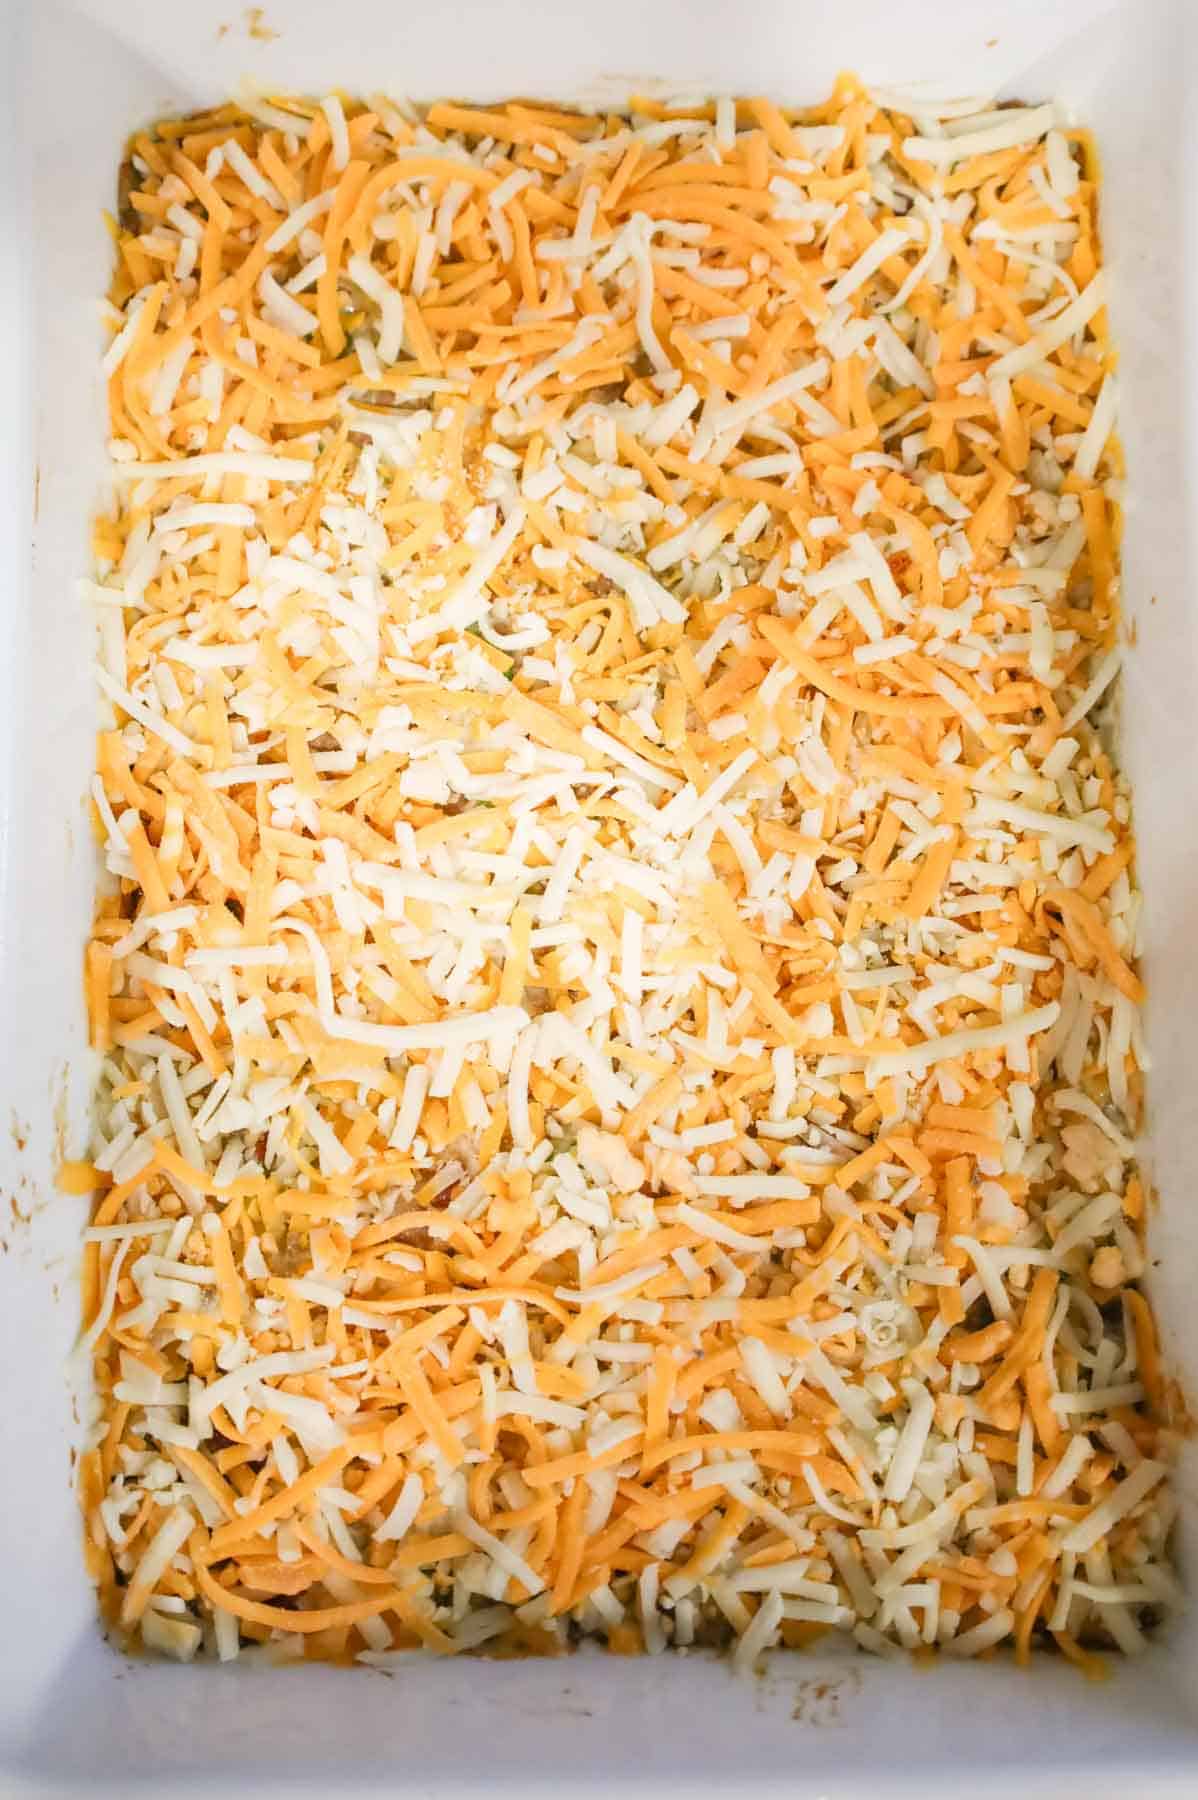 shredded cheese on top of ground beef and rice mixture in a baking dish